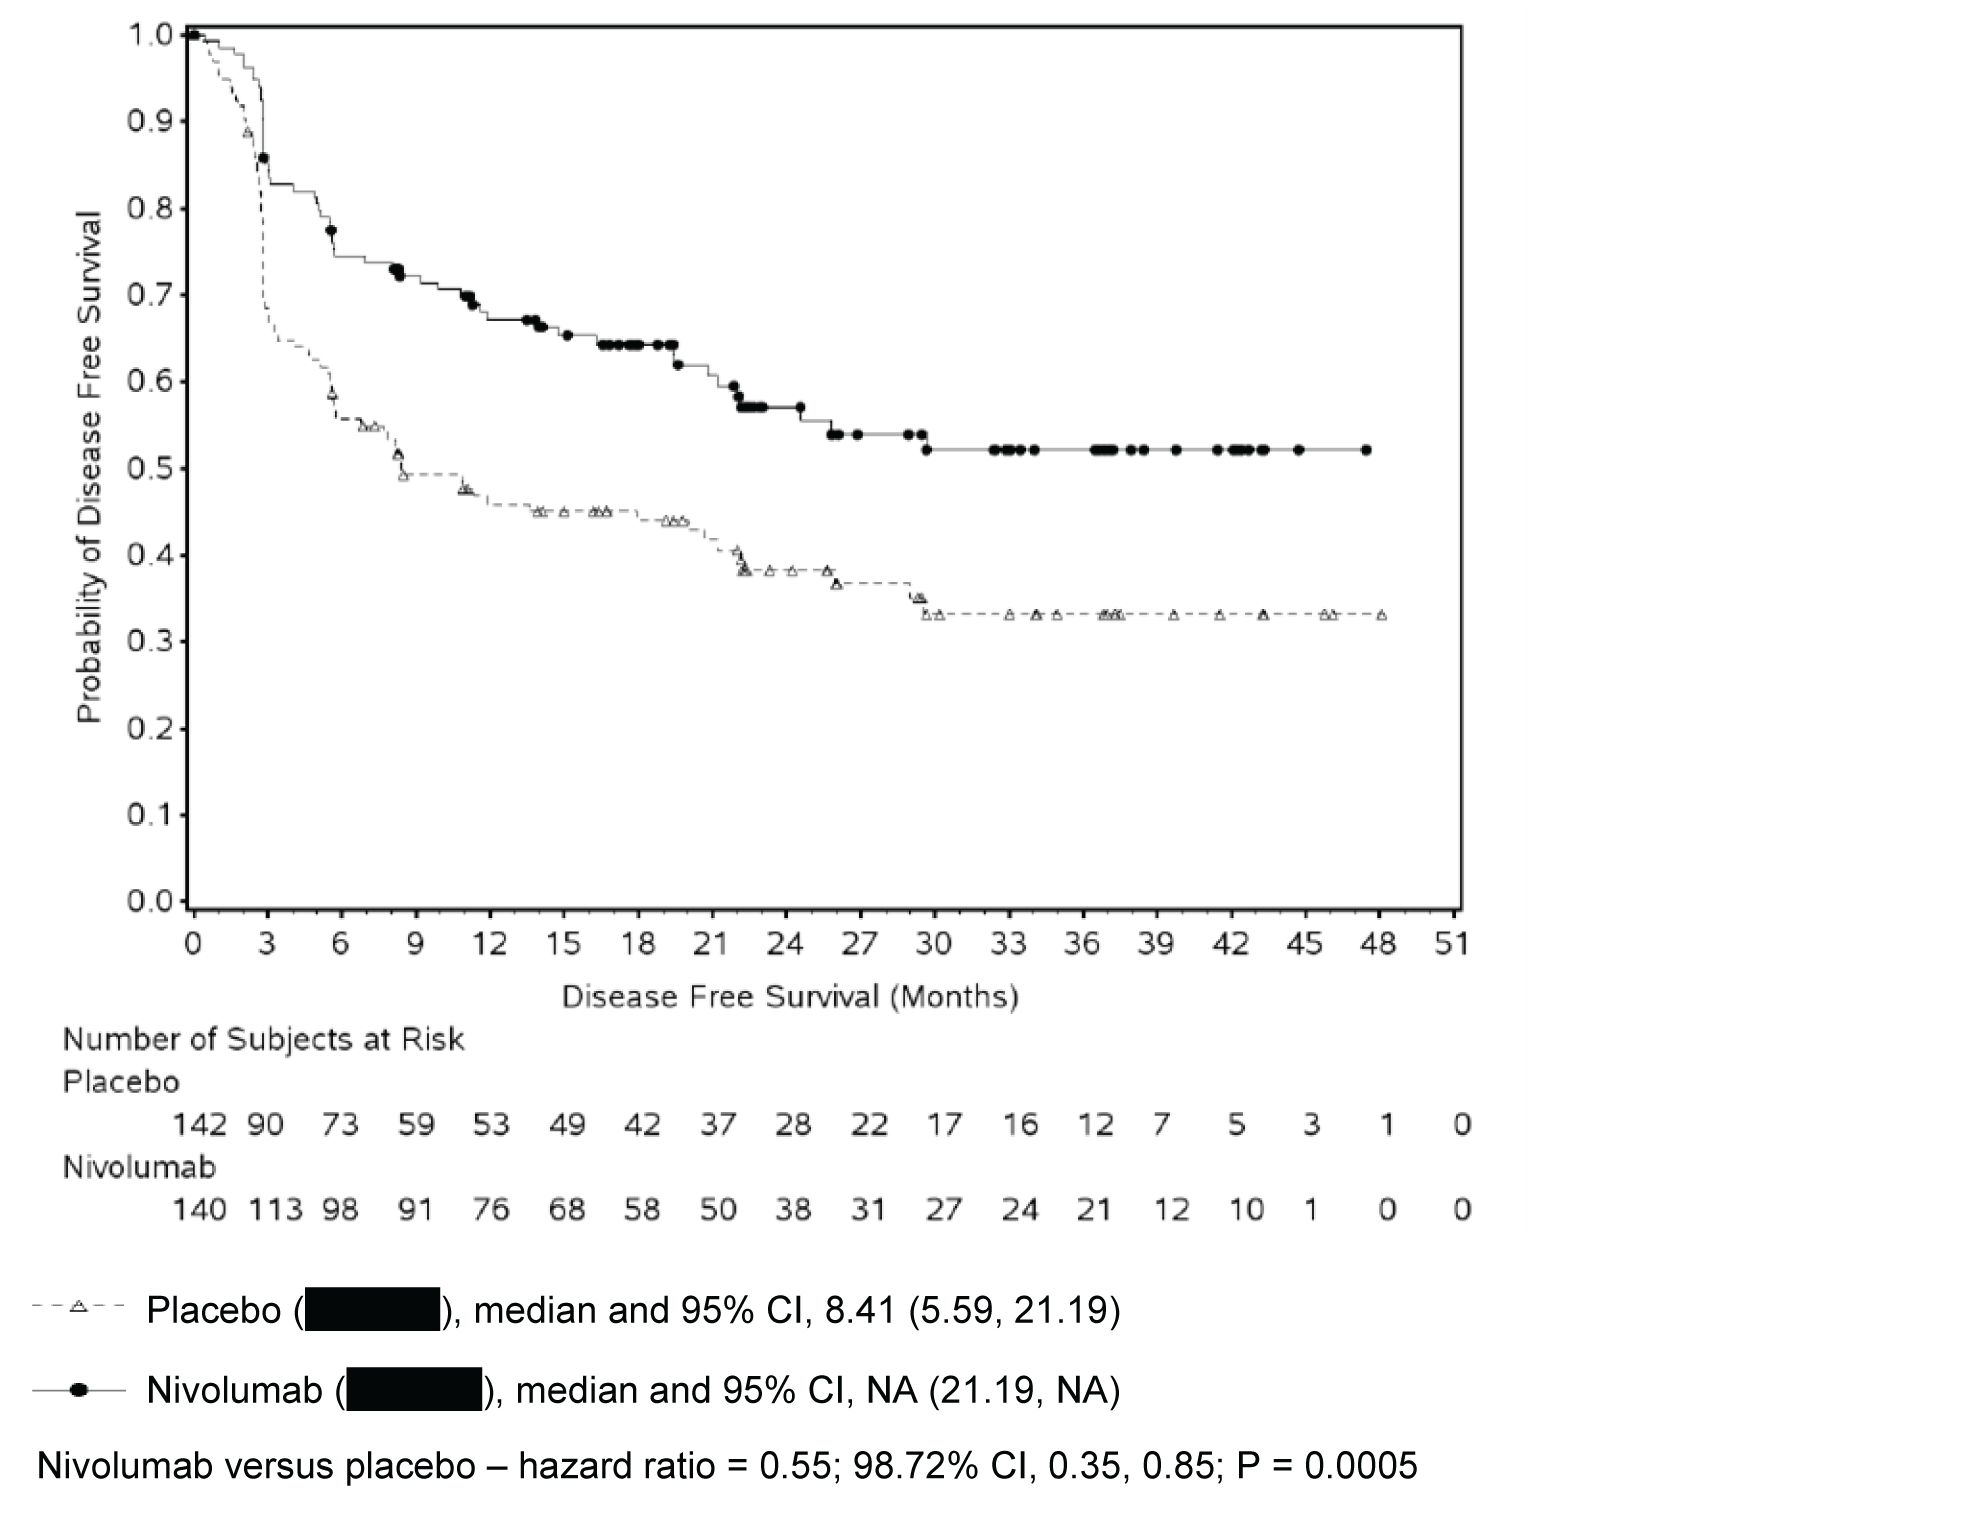 In this Kaplan-Meier analysis of DFS (primary definition) among all randomized patients with tumour PD-L1 expression of 1% or greater in the CheckMate 274 trial, the curves representing patients who received nivolumab and placebo follow a similar downwards slope, with the placebo curve falling below the nivolumab curve. The curves end at 50 months with survival of greater than 50% for patients receiving nivolumab and greater than 30% for patients receiving placebo.